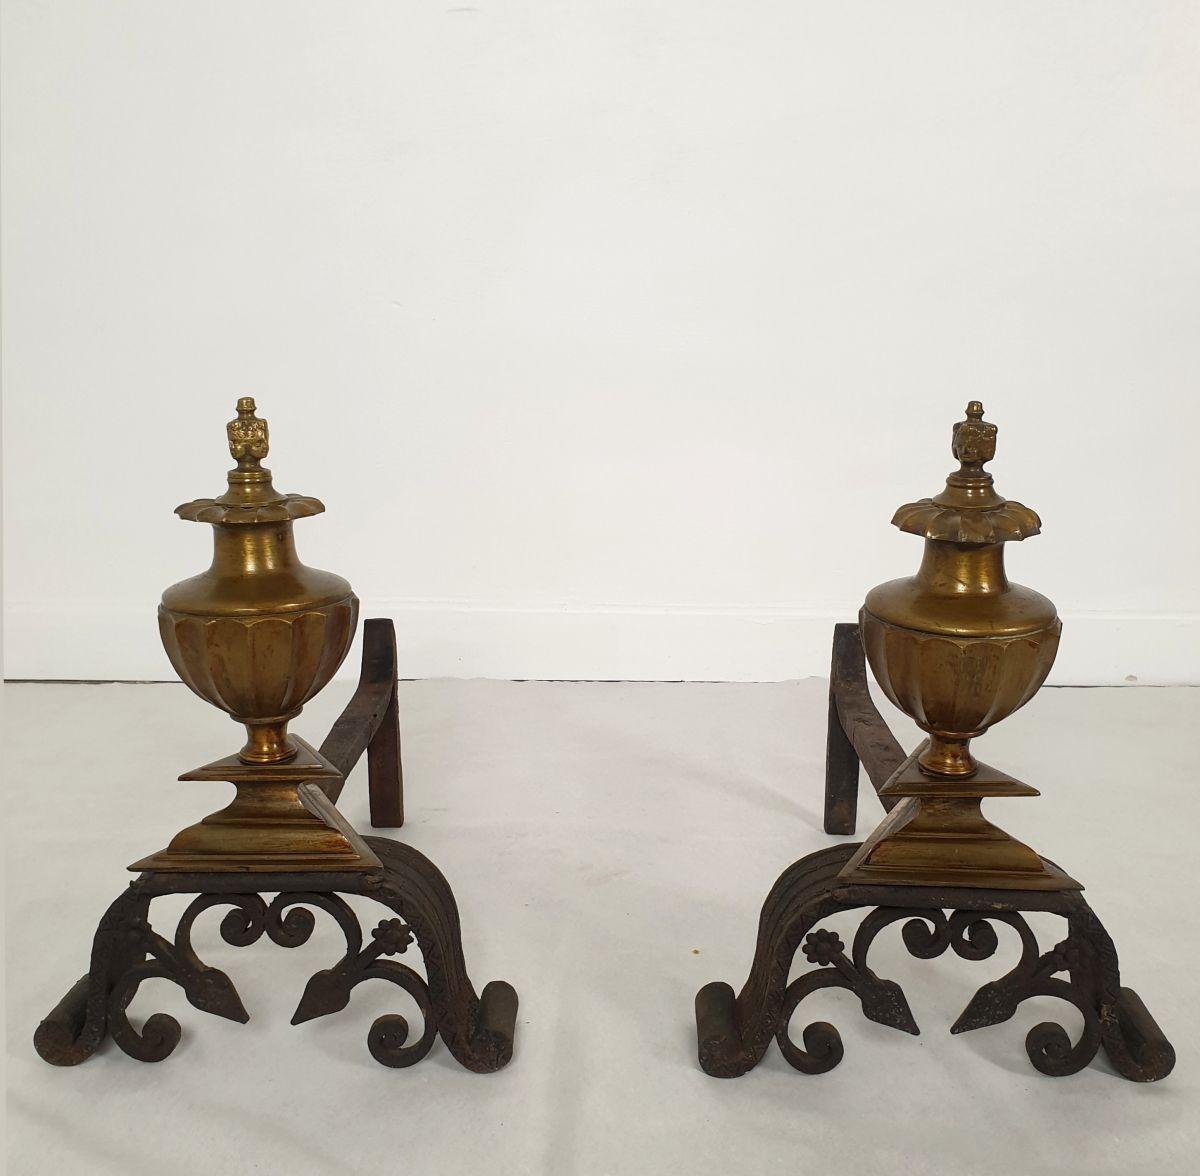 Pair of Italian decorative andirons, circa 1900s.
The pair of andirons is made of bronze and hand-crafted wrought iron.
Fully decorated with 4 faces on the top of the bronze elements; and a decor on the wrought iron.
In very good condition.
